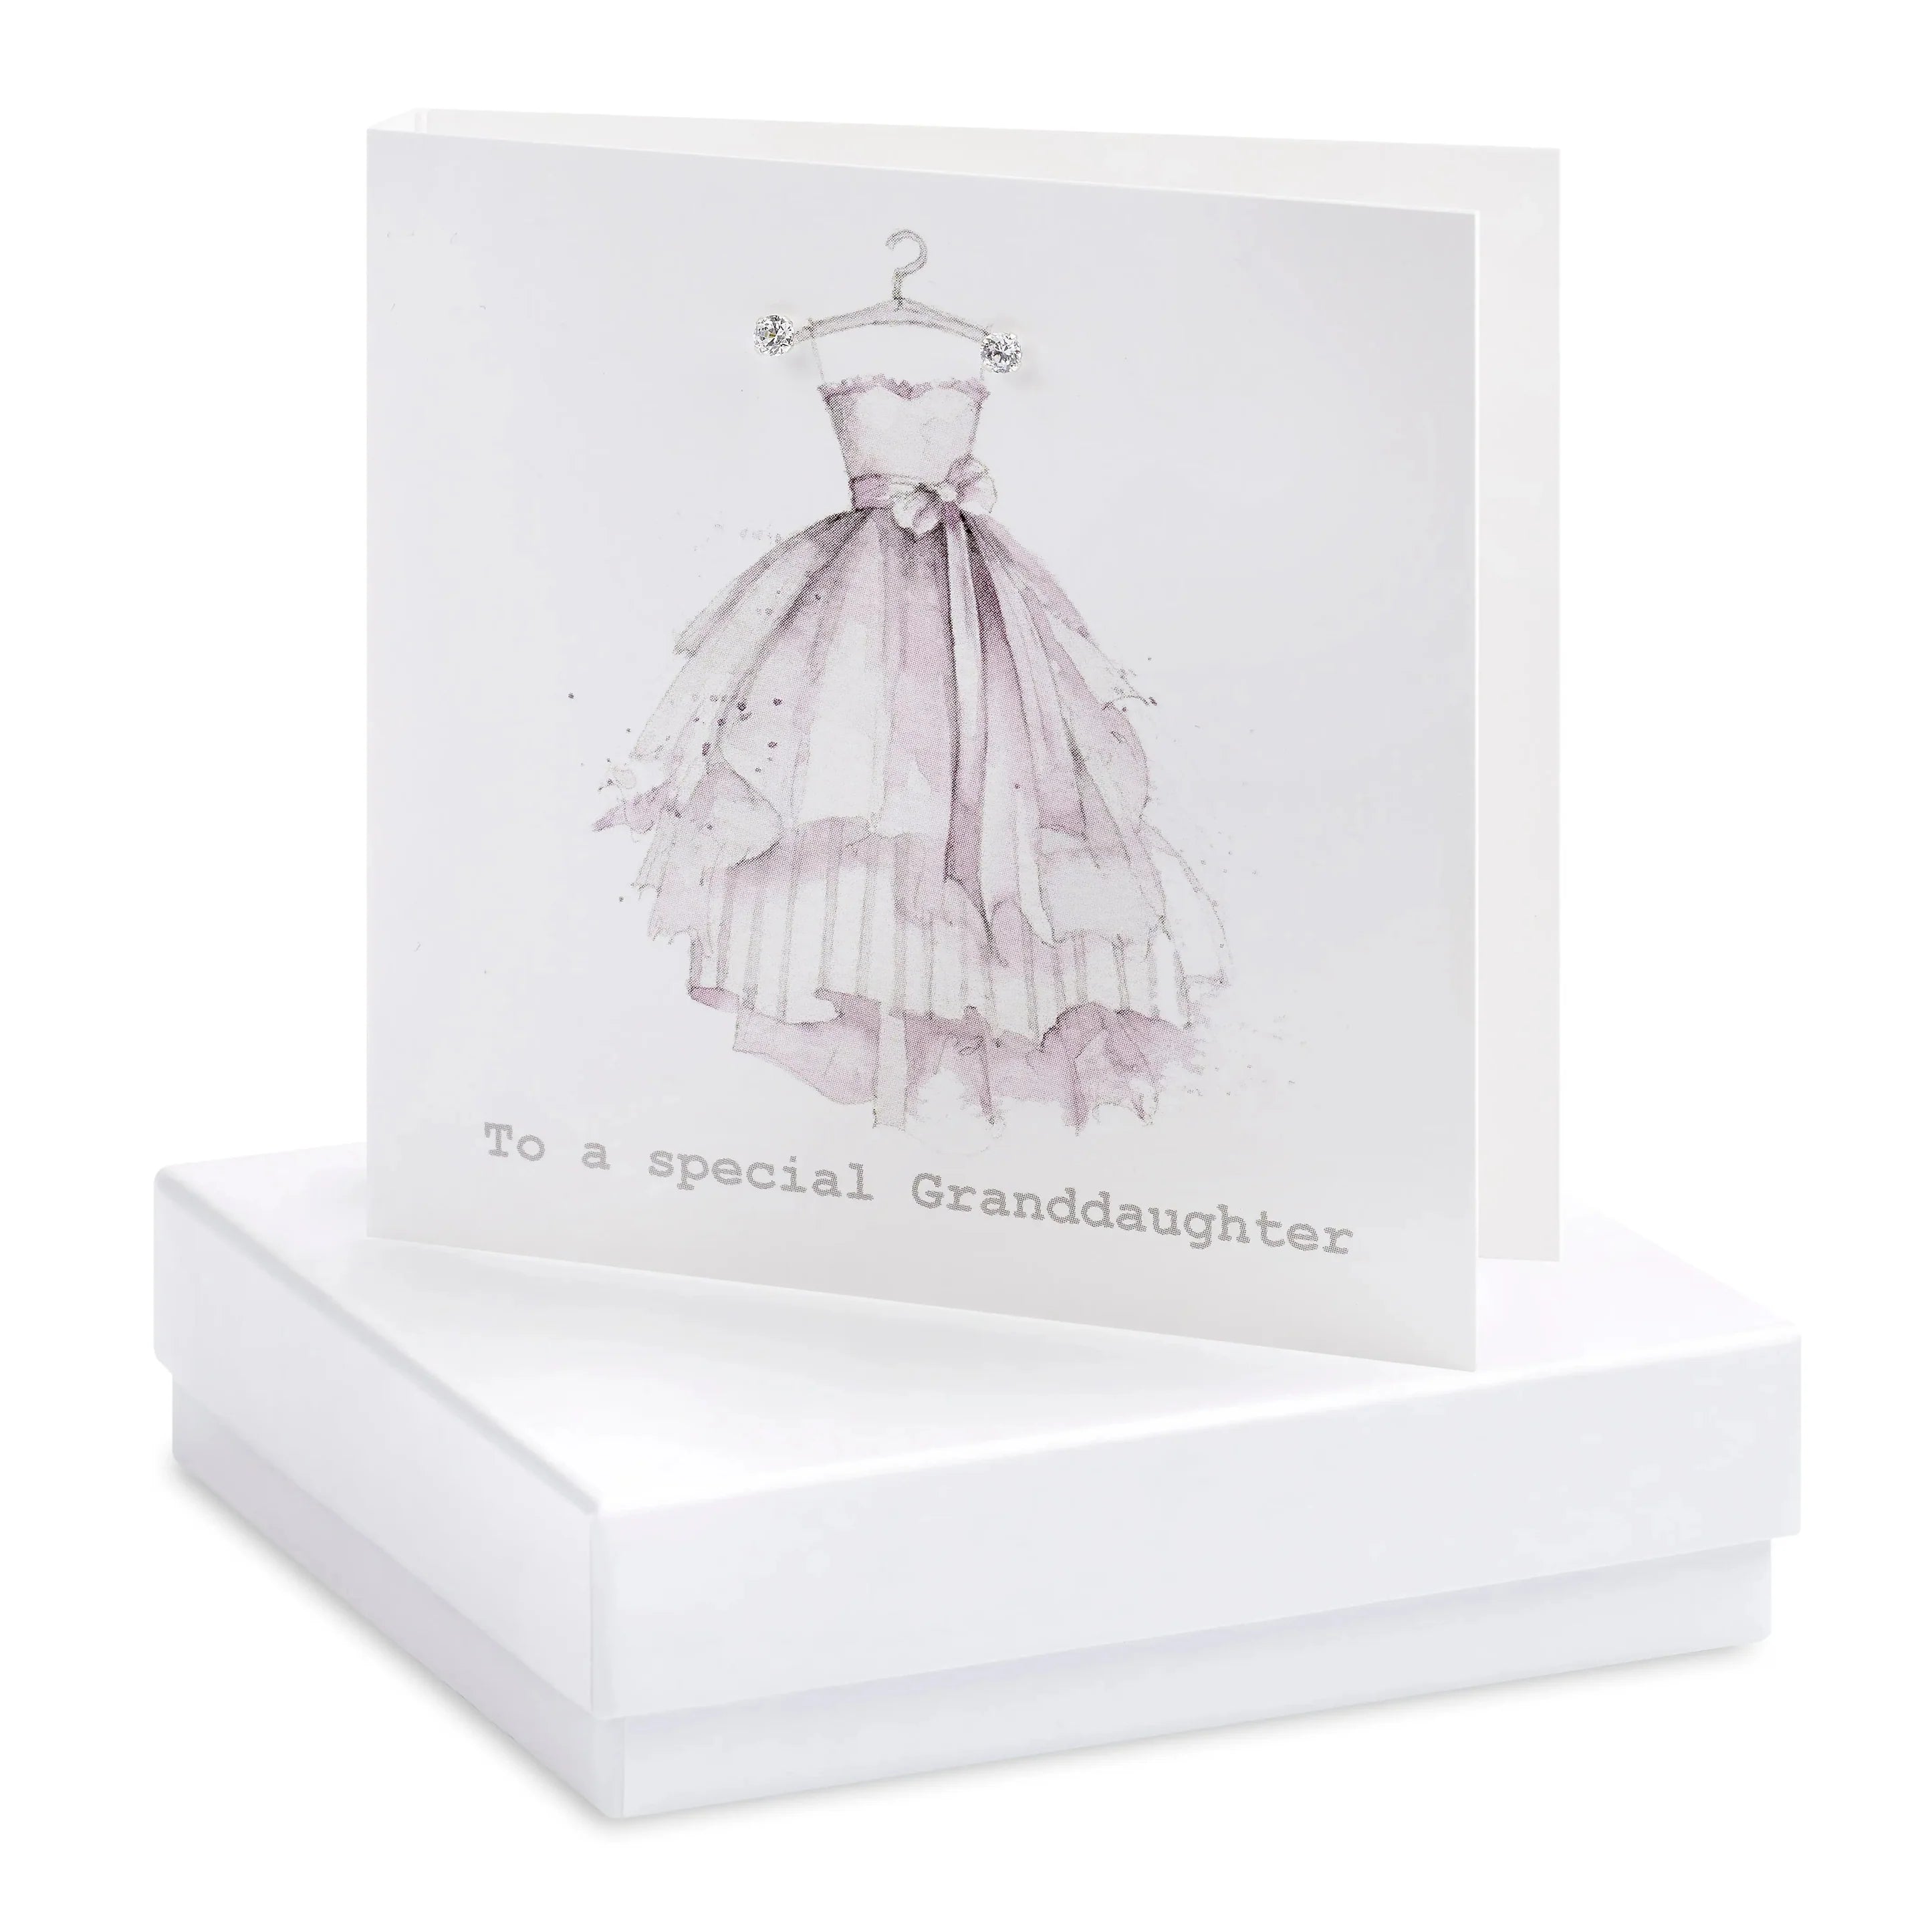 Fabulous Gifts Crumble & Core Box Granddaughter Dress Earring Card by Weirs of Baggot Street